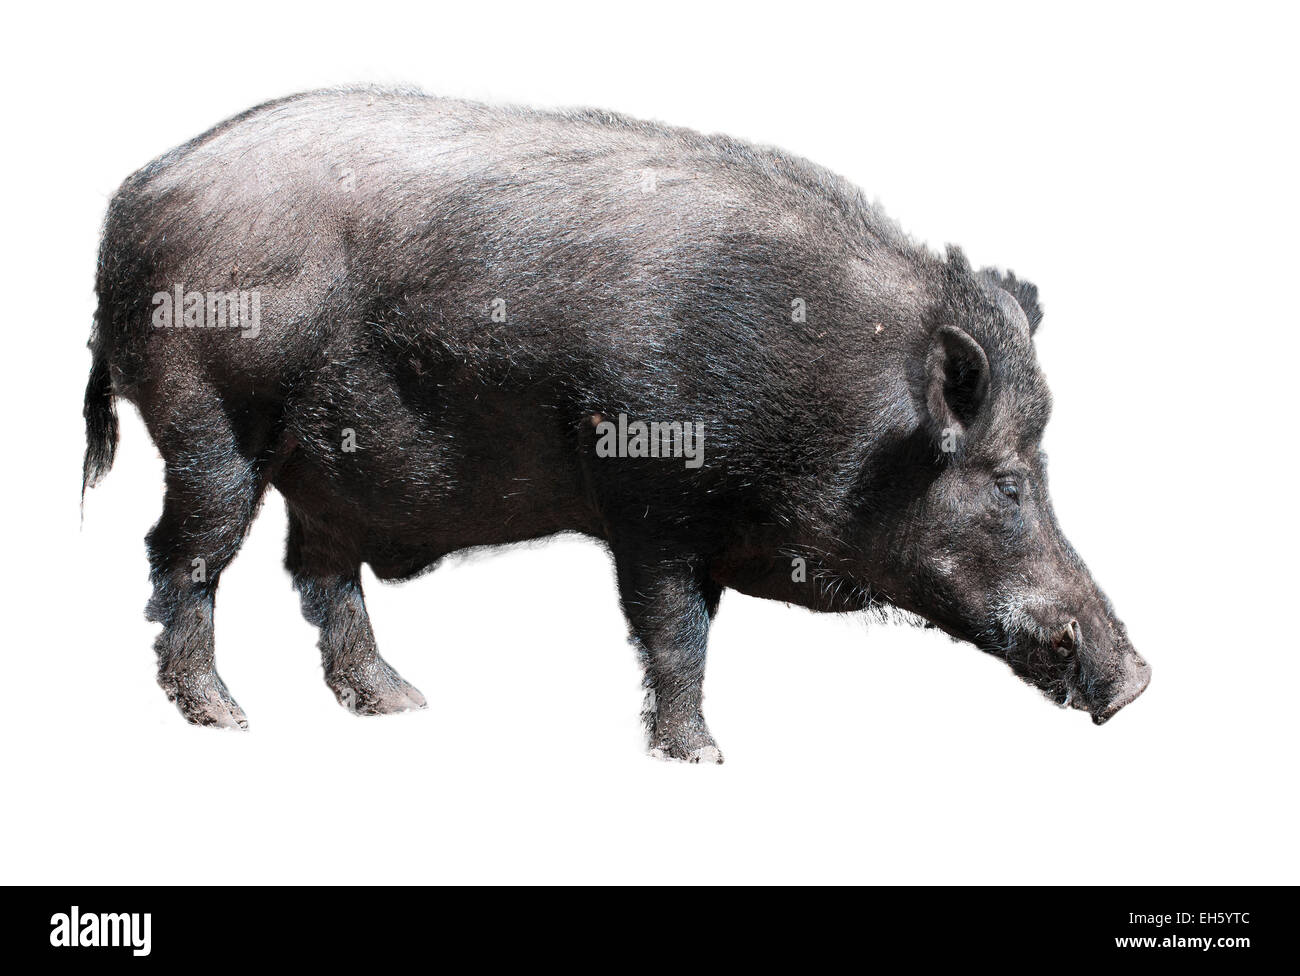 Wild boar on a white background Stock Photo